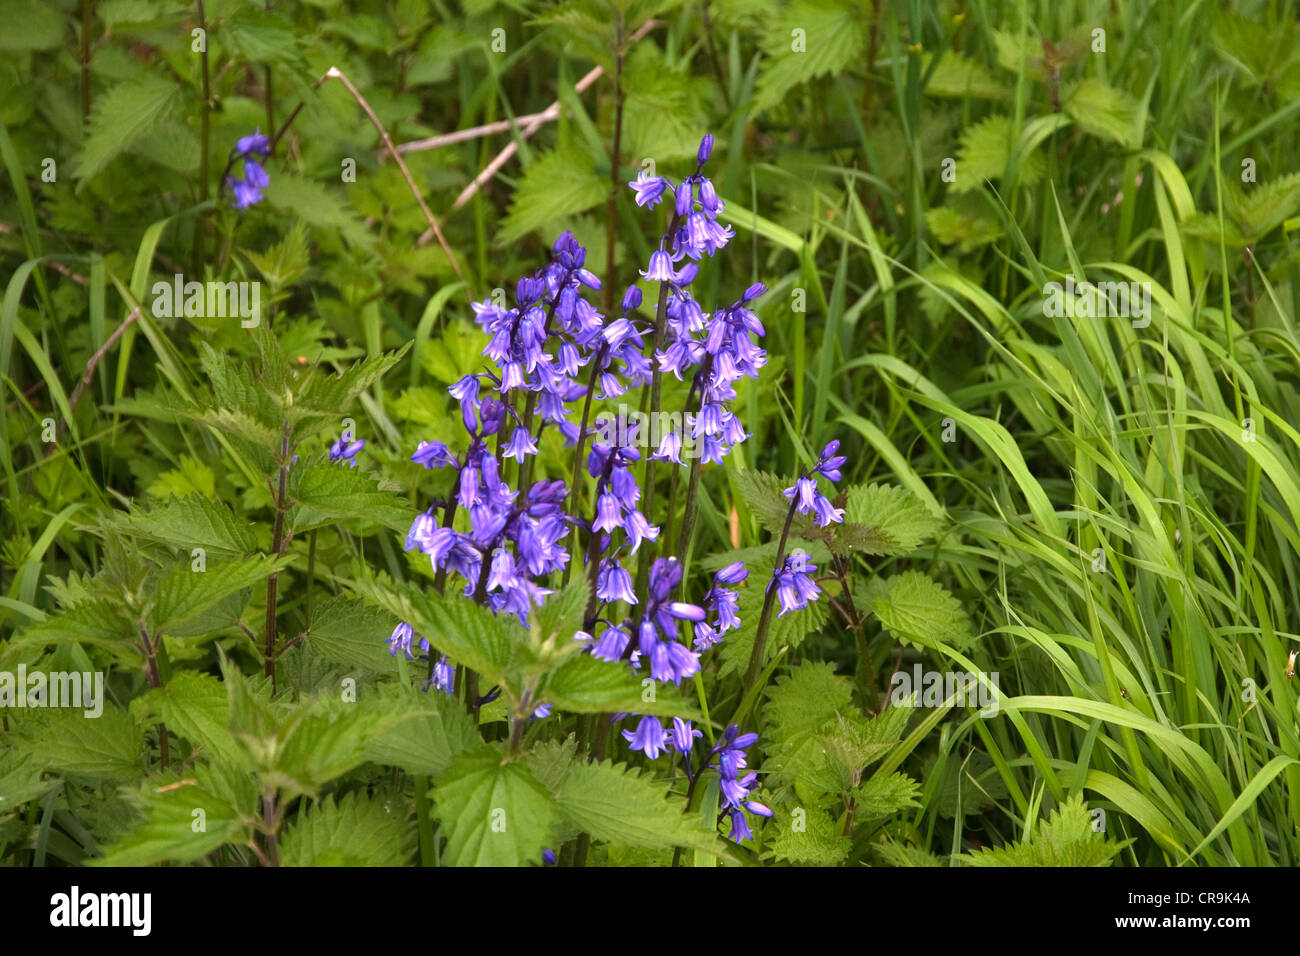 Bluebells flowering surrounded by nettles and long grass Stock Photo